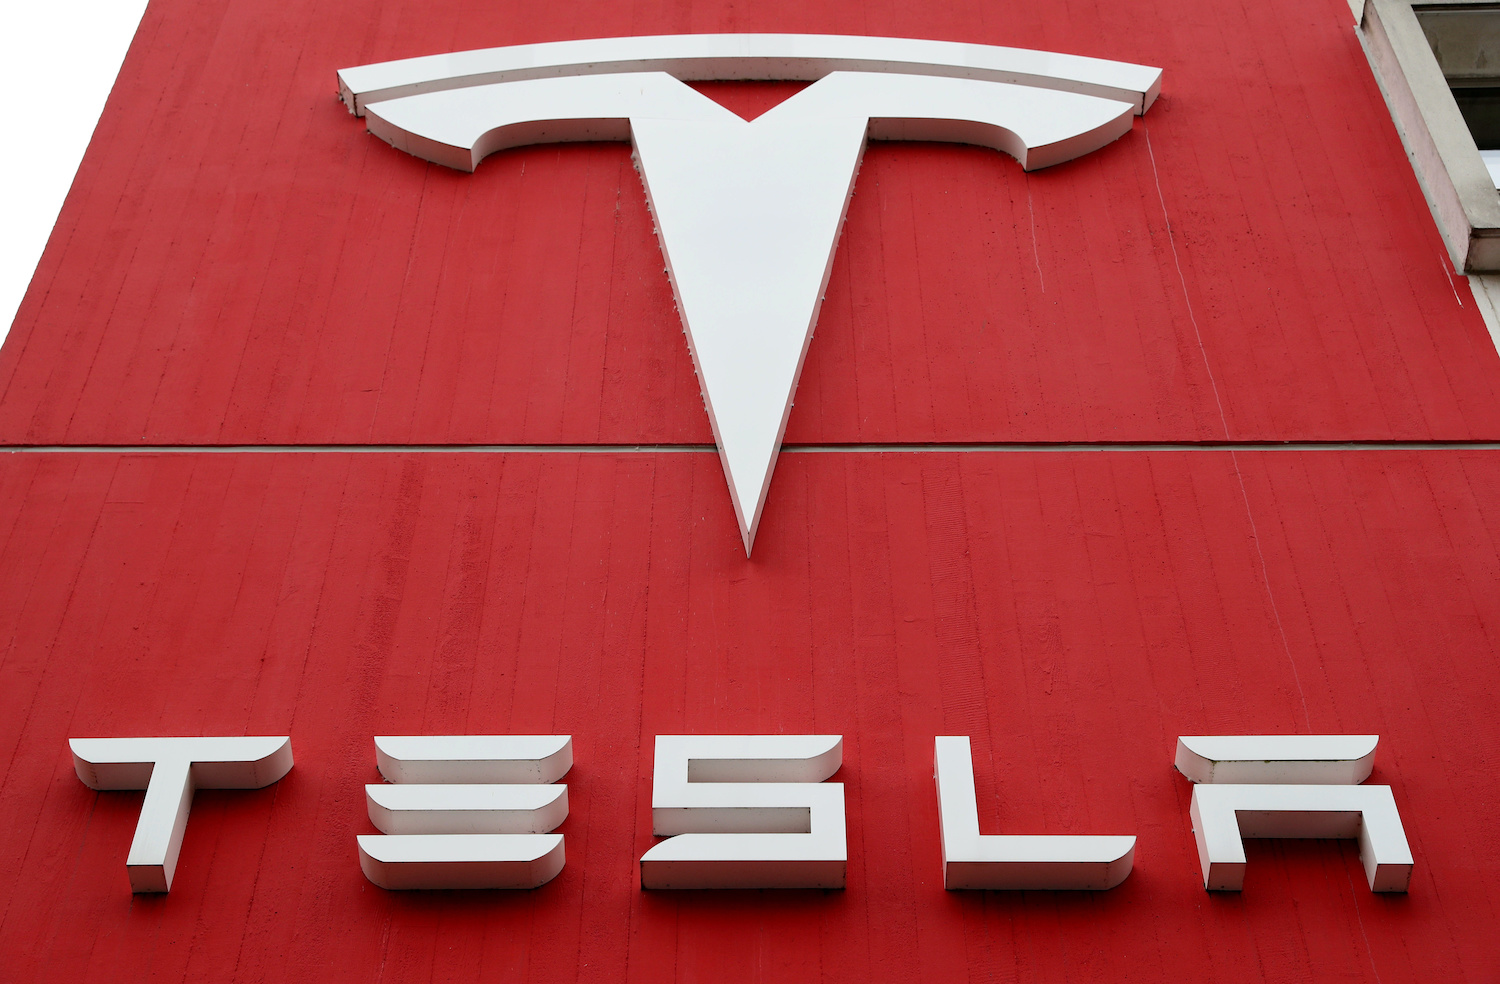 Electric carmaker Tesla invests $1.5 billion in bitcoin: official